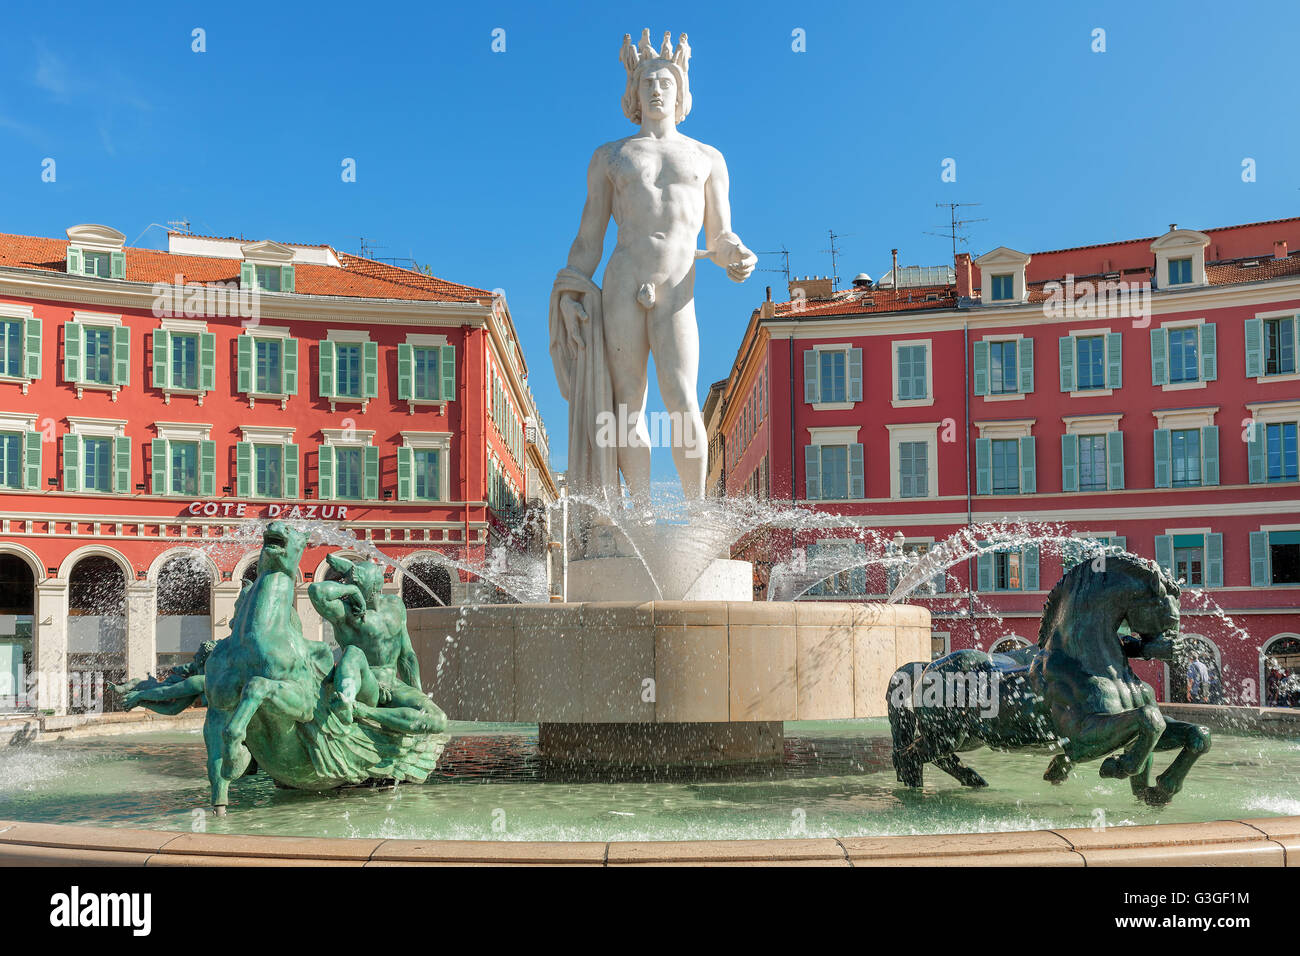 Fountain of the Sun (Fontaine du Soleil) on Place Massena in Nice, France. Stock Photo